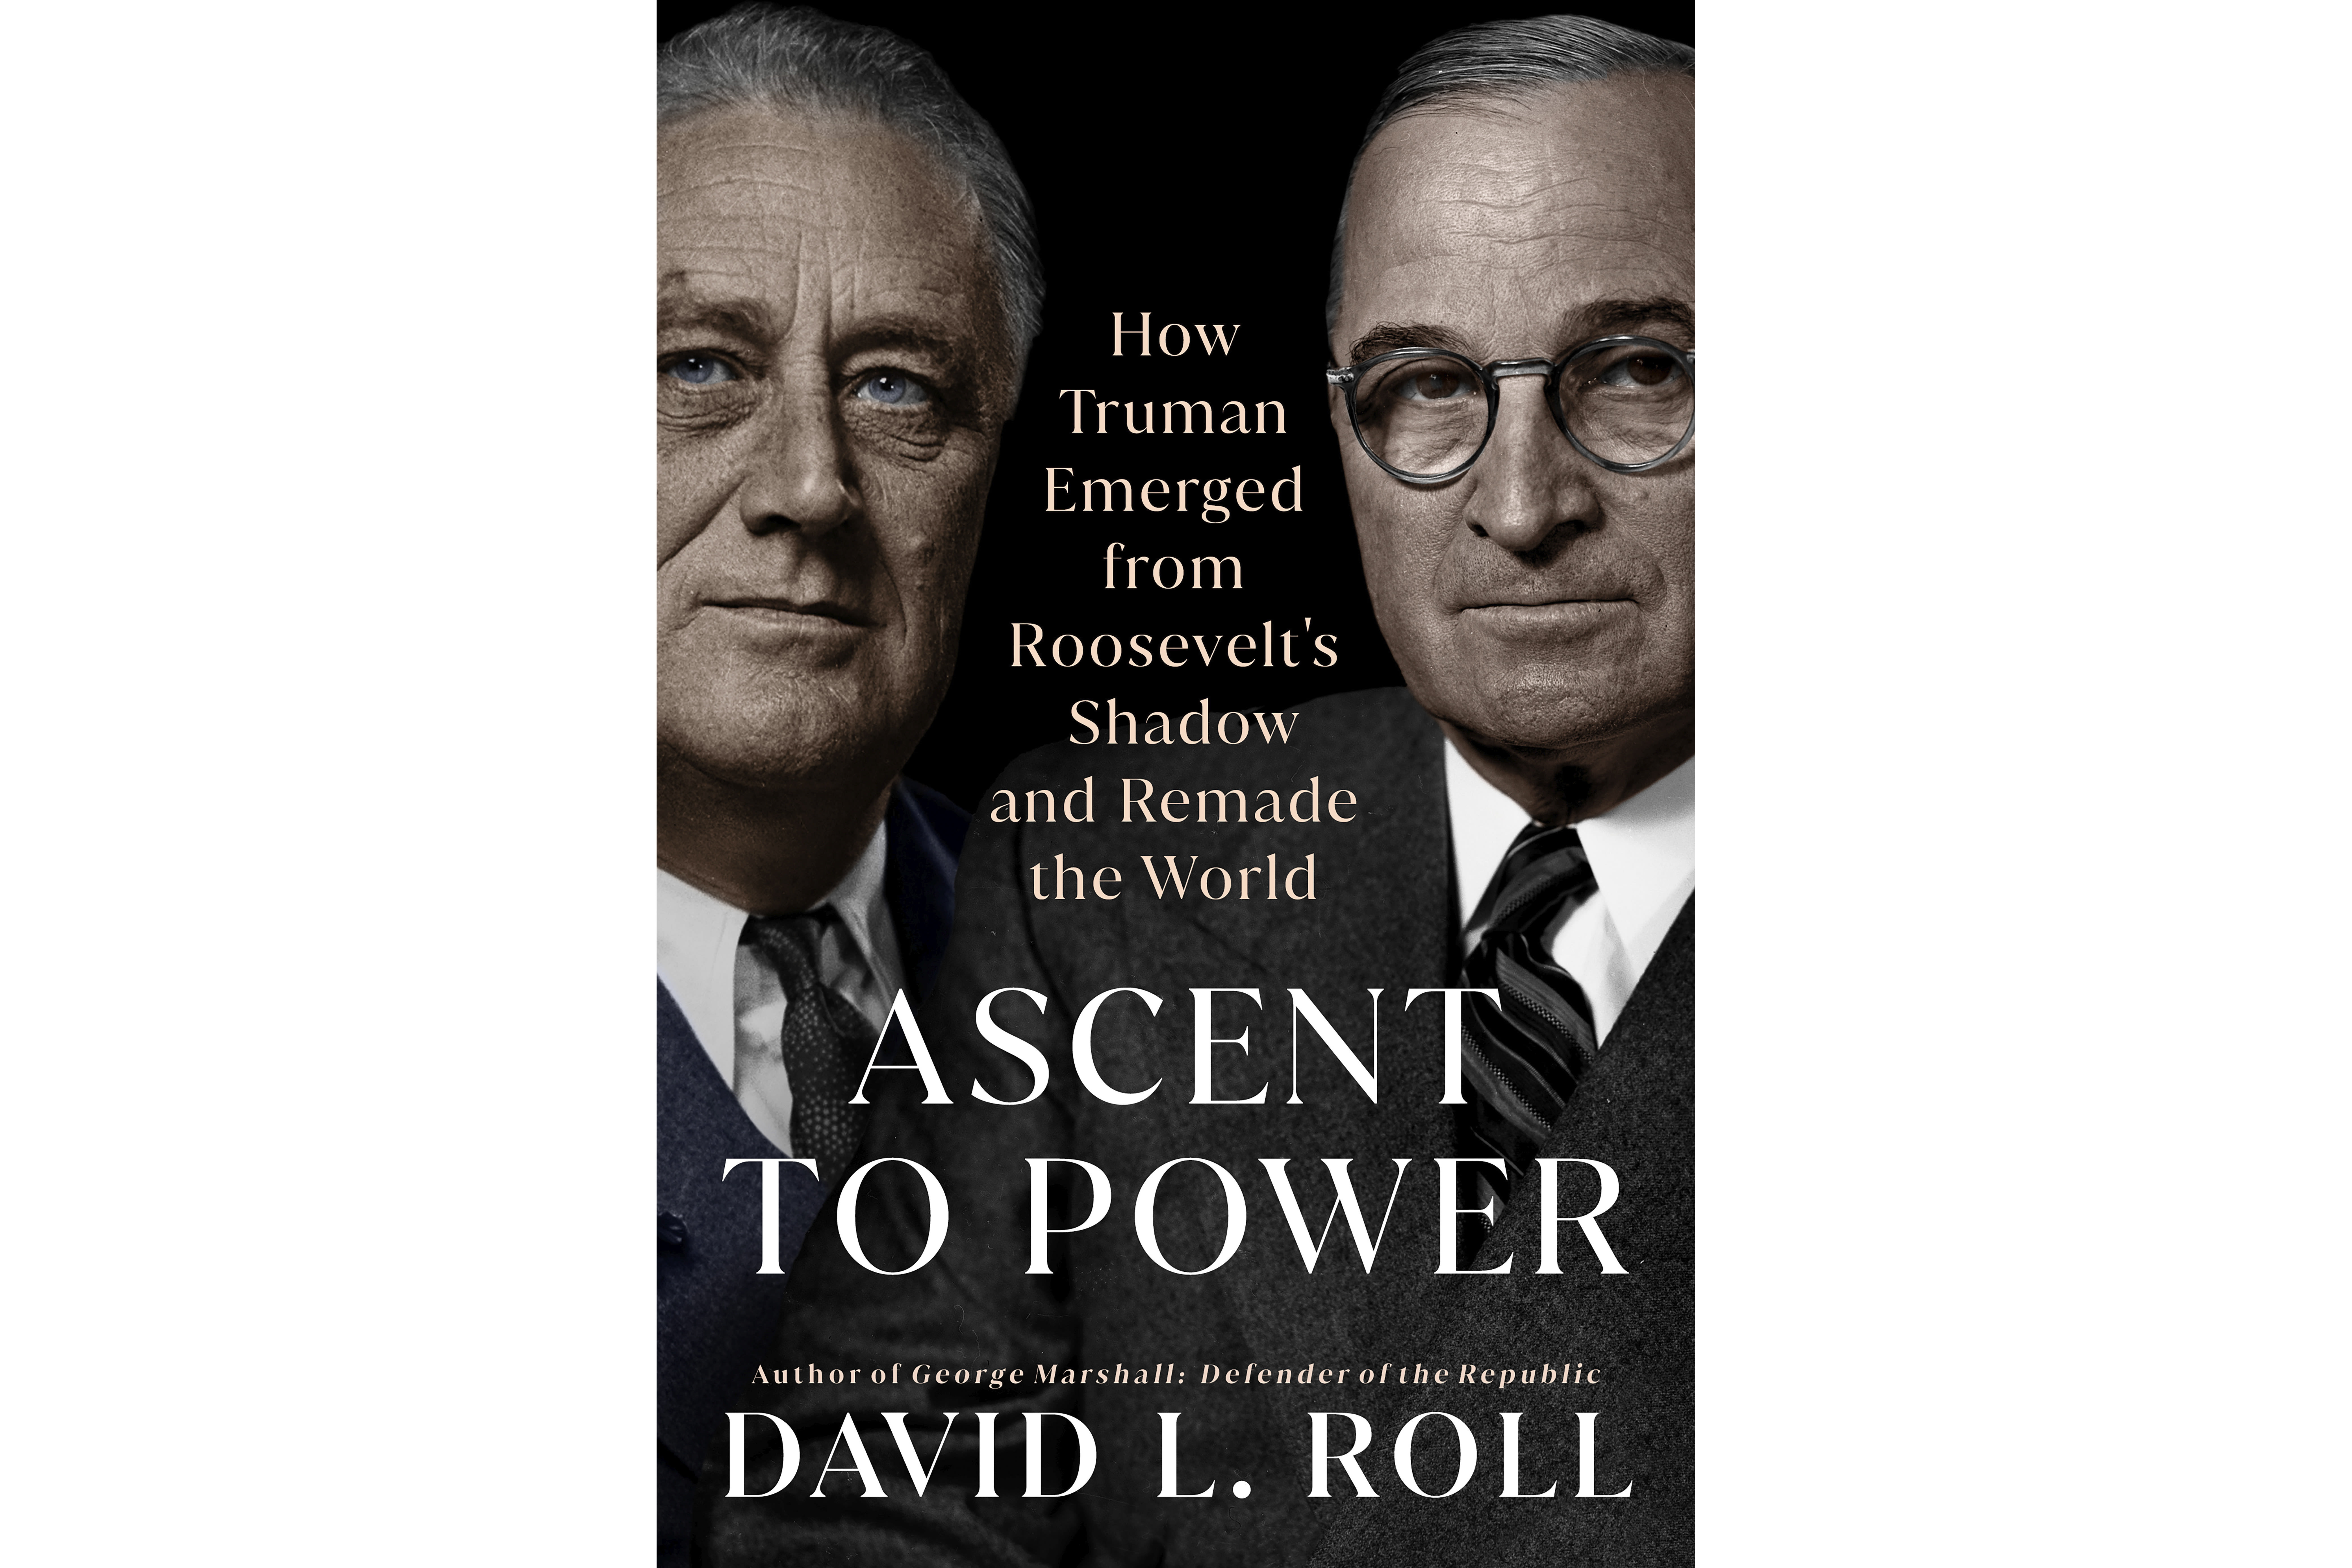 Book Review: 'Ascent to Power' studies how Harry Truman overcame lack of preparation in transition